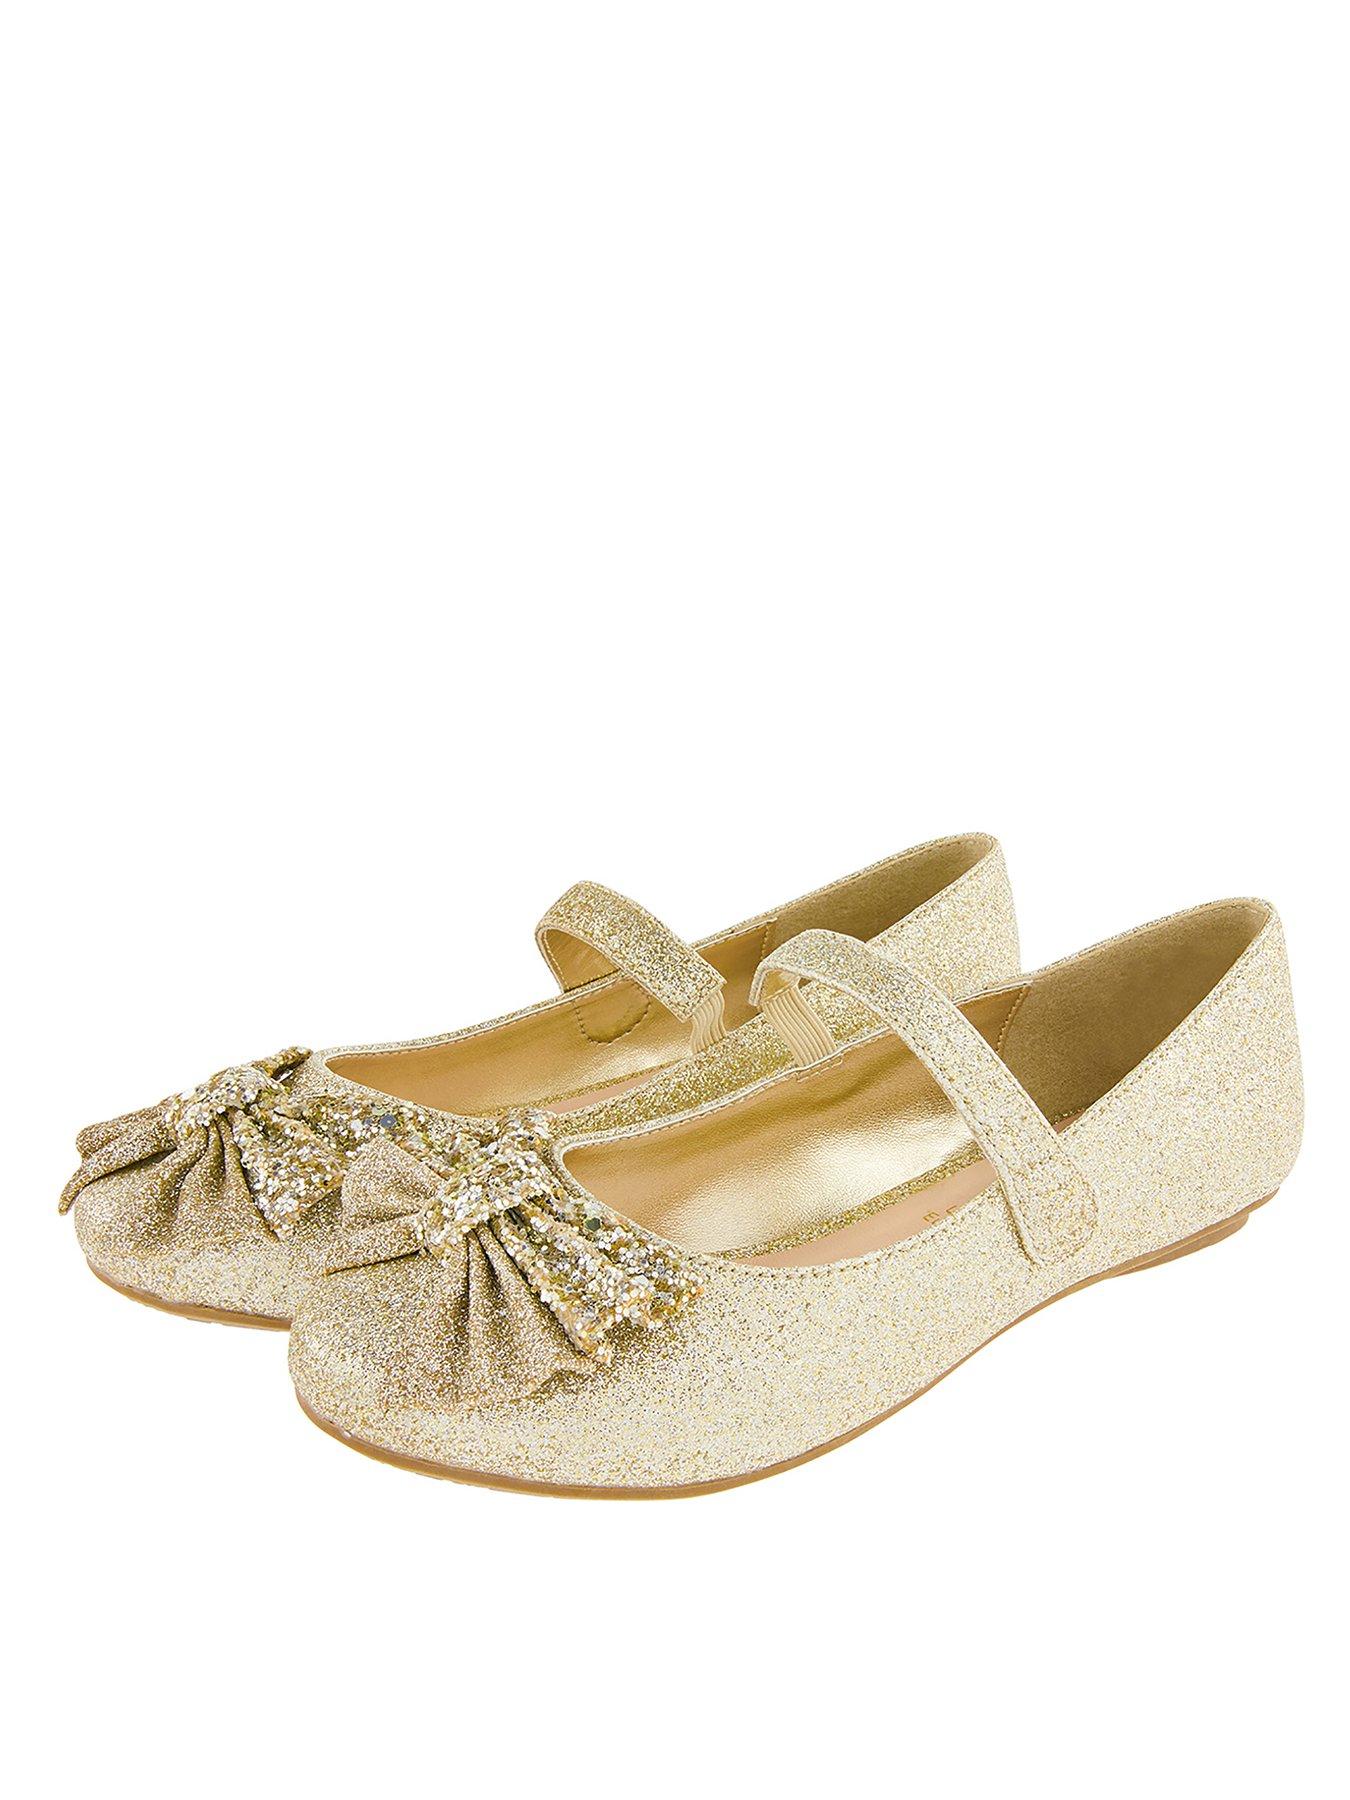 baby christening shoes monsoon